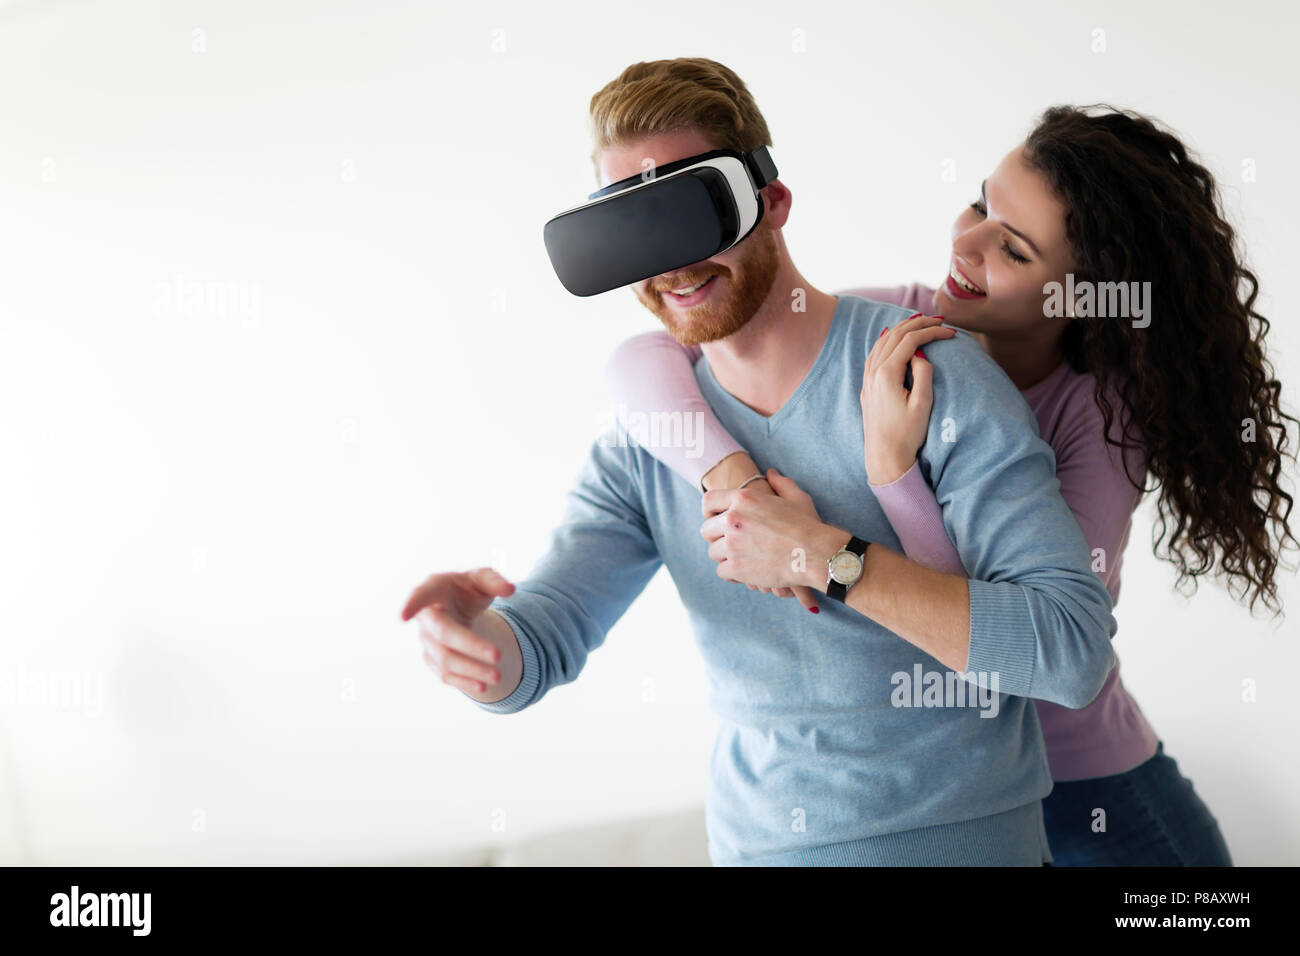 Attractive young couple trying virtual reality headset Stock Photo